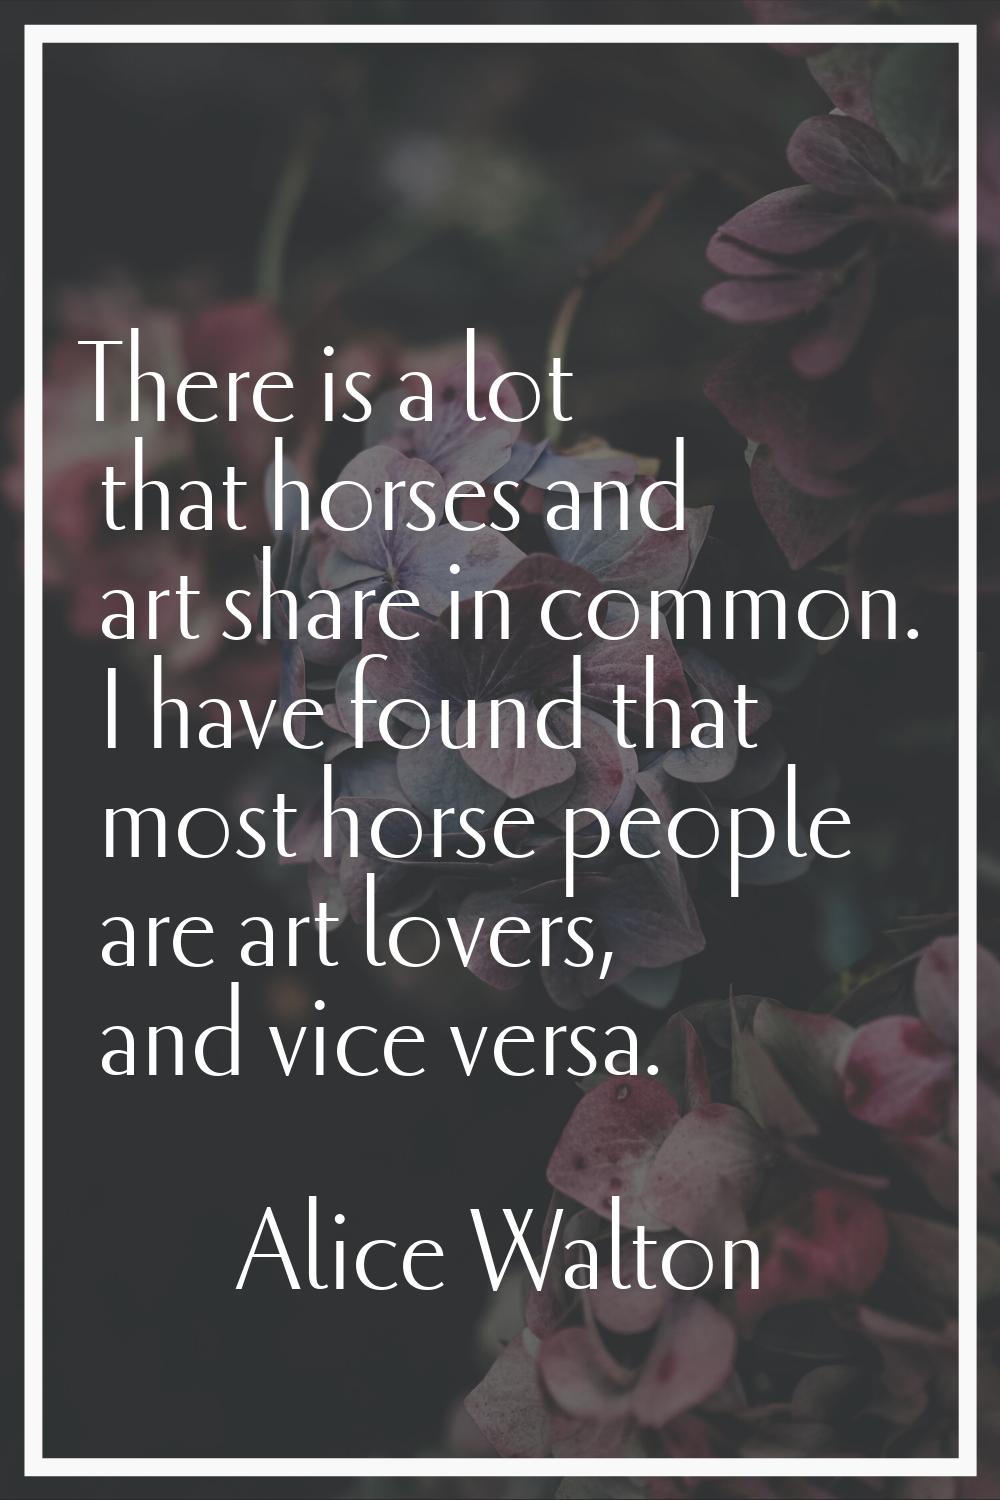 There is a lot that horses and art share in common. I have found that most horse people are art lov